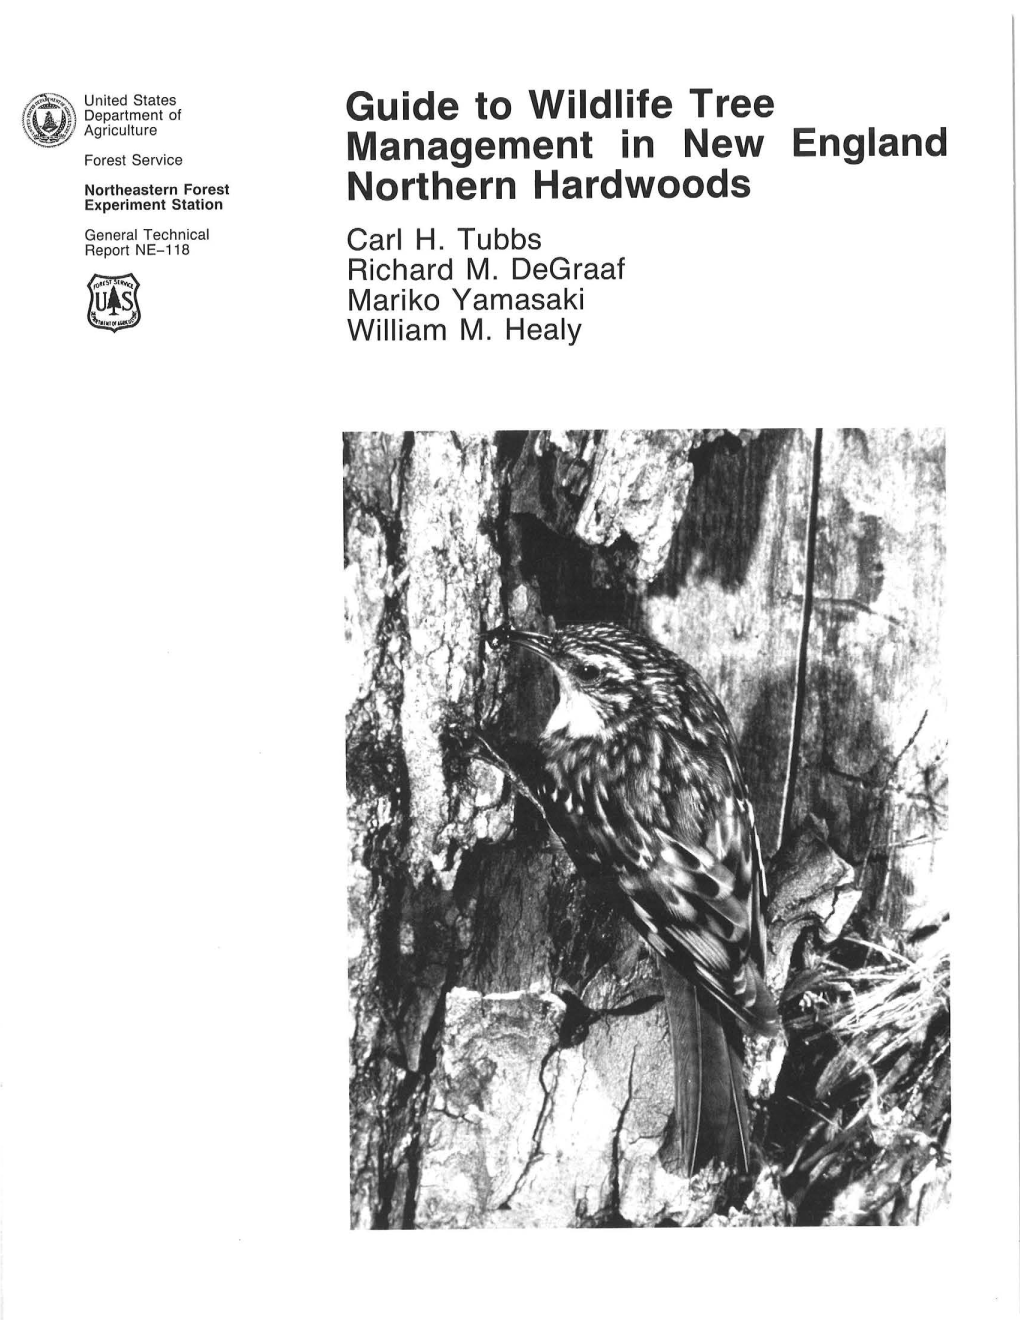 Guide to Wildlife Tree Management in New England Northern Hardwoods